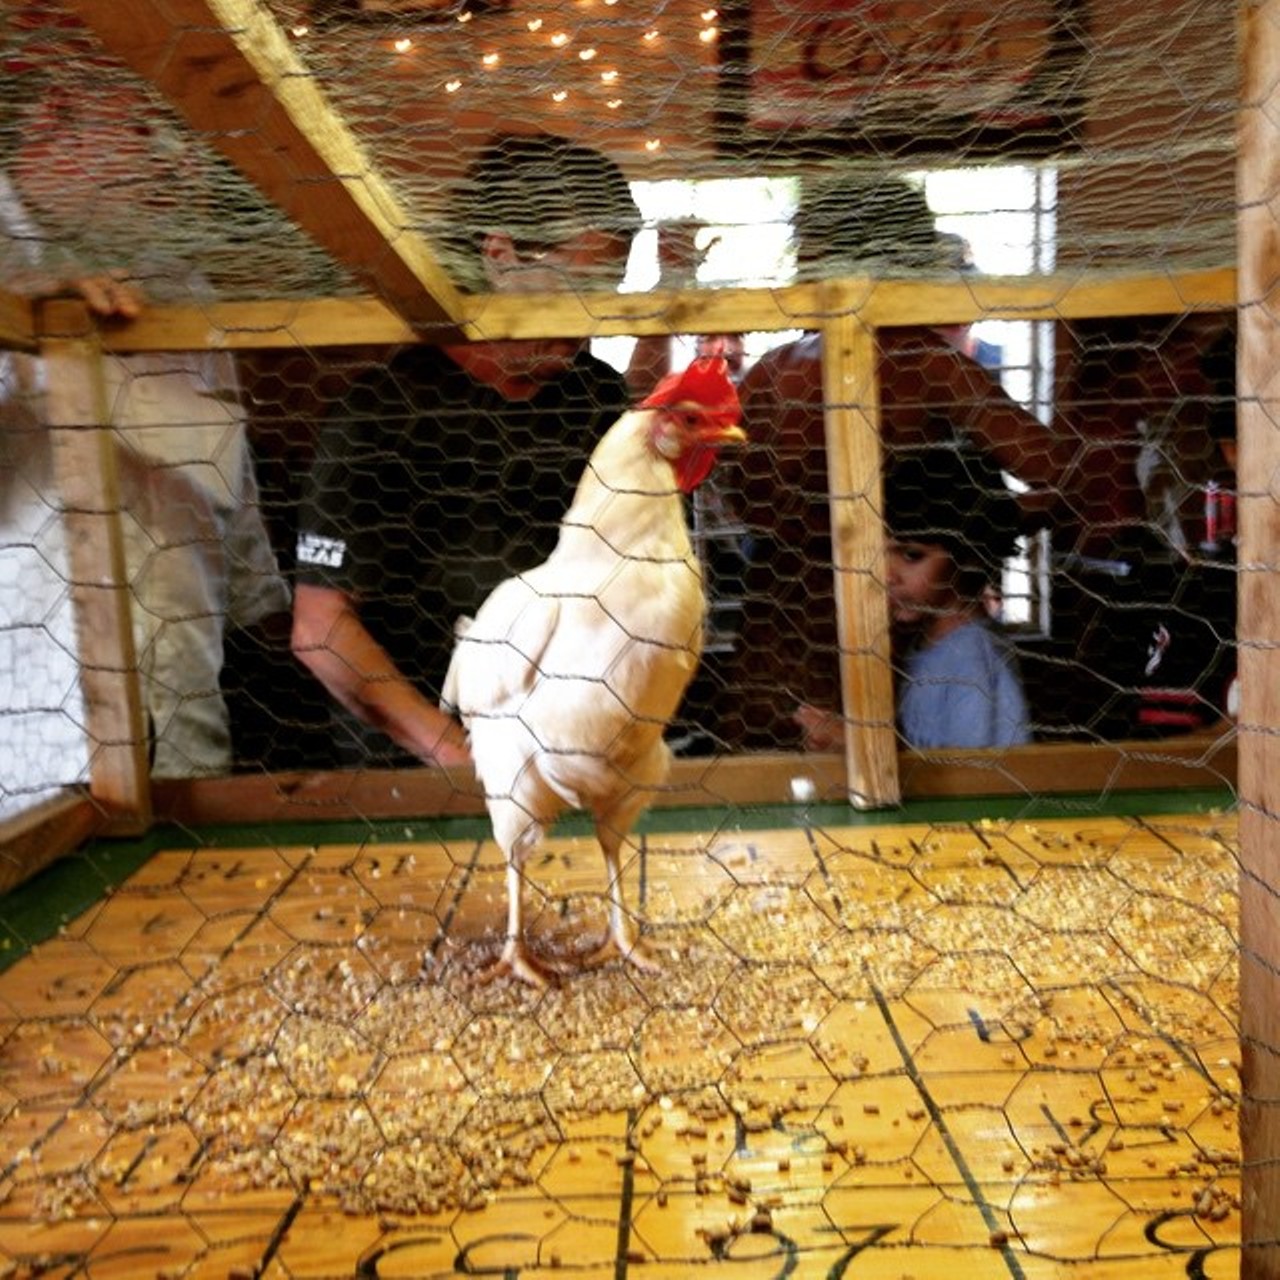 The Big T. Roadhouse
11781 FM 1346, thebigtroadhouse.com
The Big T. Roadhouse just outside of Alamo City in Adkins, Texas hosts a wacko event on Sundays called Chicken Shit Bingo, during which winning numbers are determined by a sporadically pooping chicken. 
Photo via Instagram (songsbury)